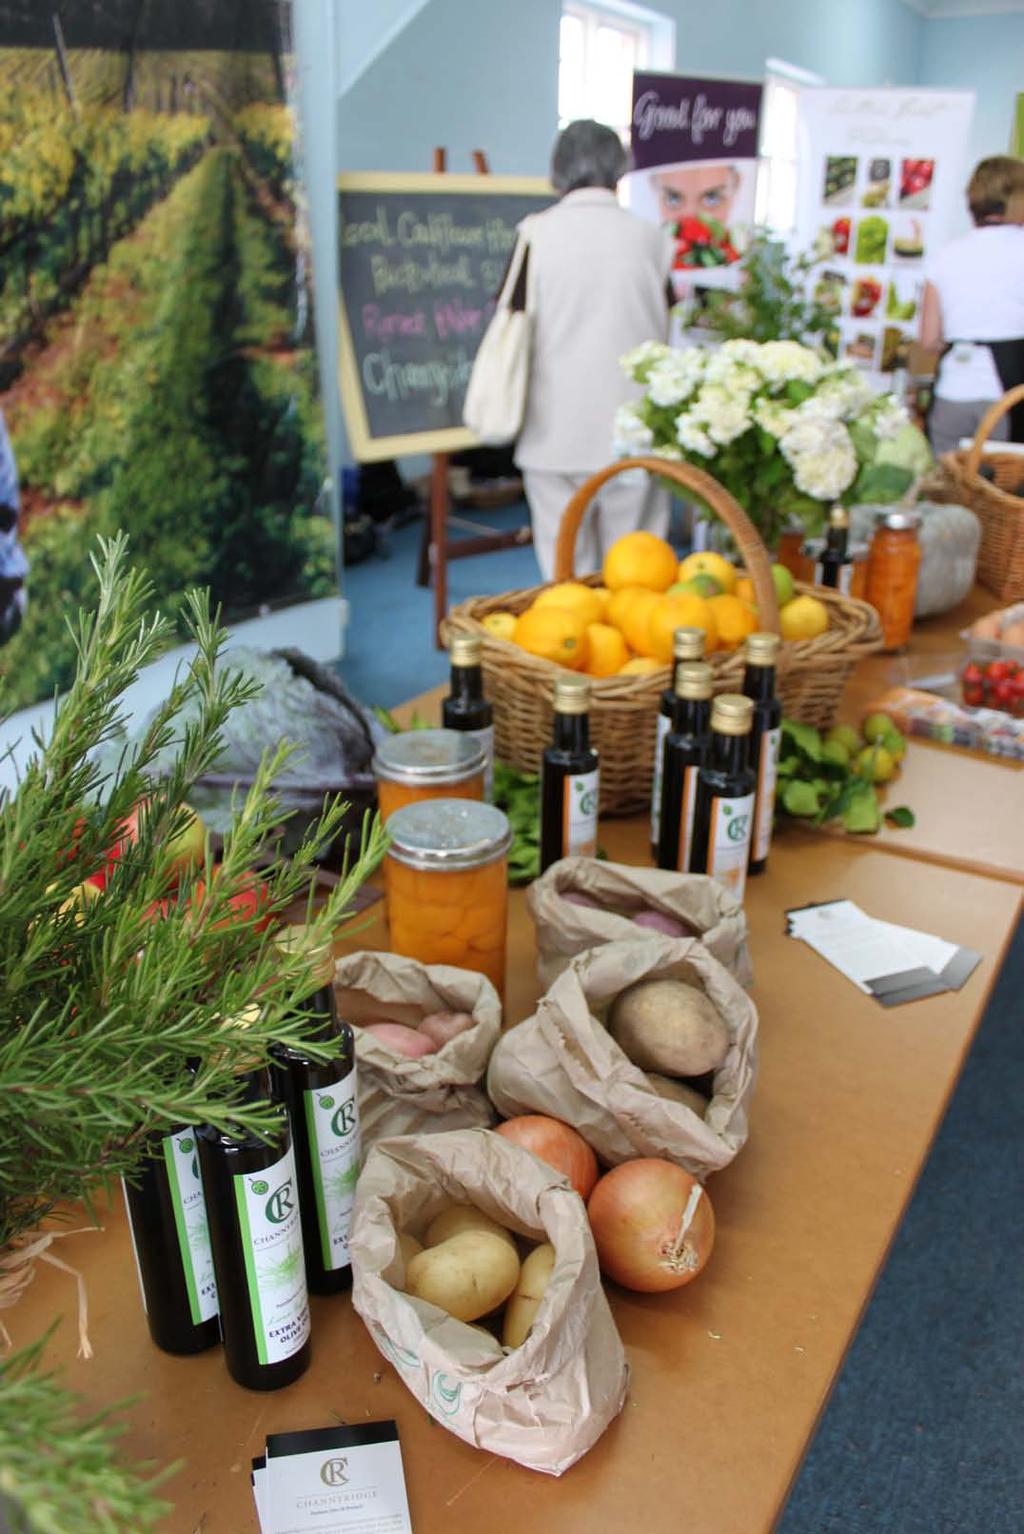 Slow Food Principles GOOD Fresh, flavoursome, seasonal, part of local culture CLEAN Produced in